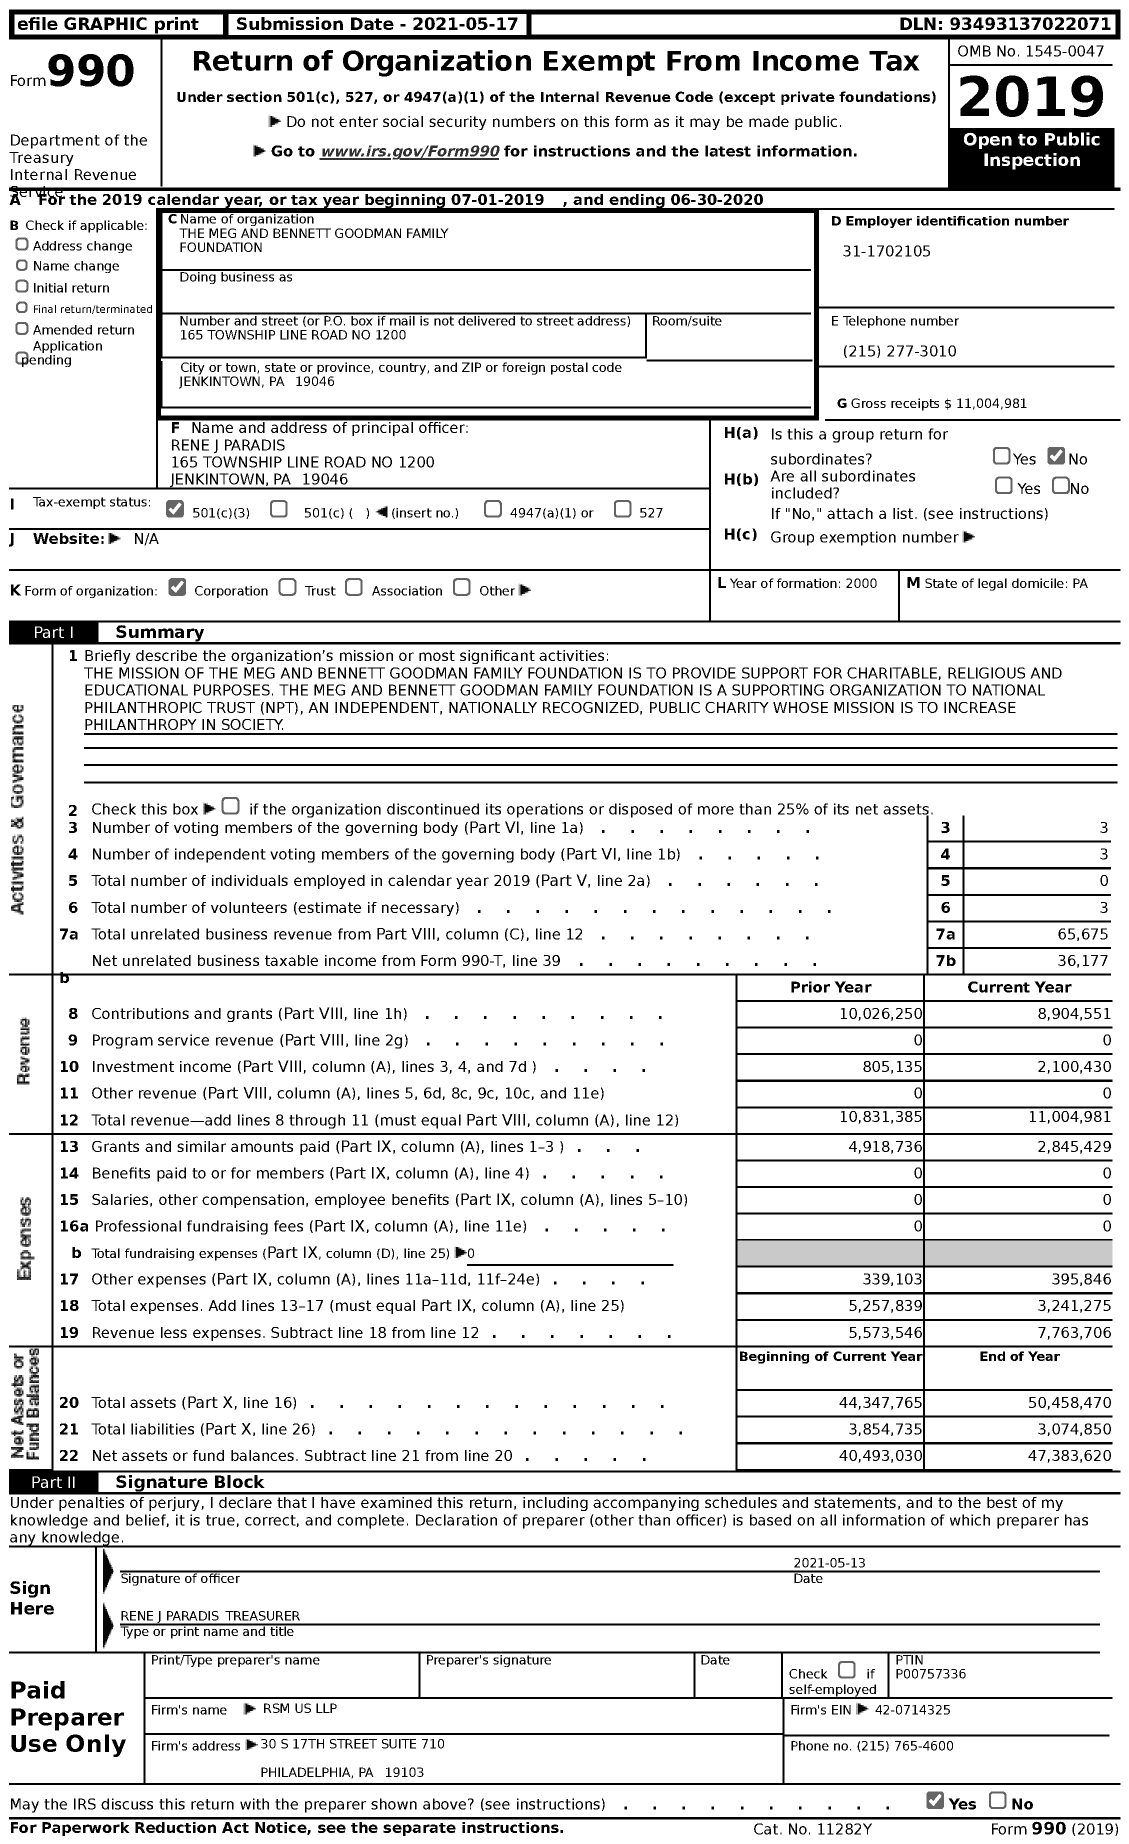 Image of first page of 2019 Form 990 for Meg and Bennett Goodman Family Foundation